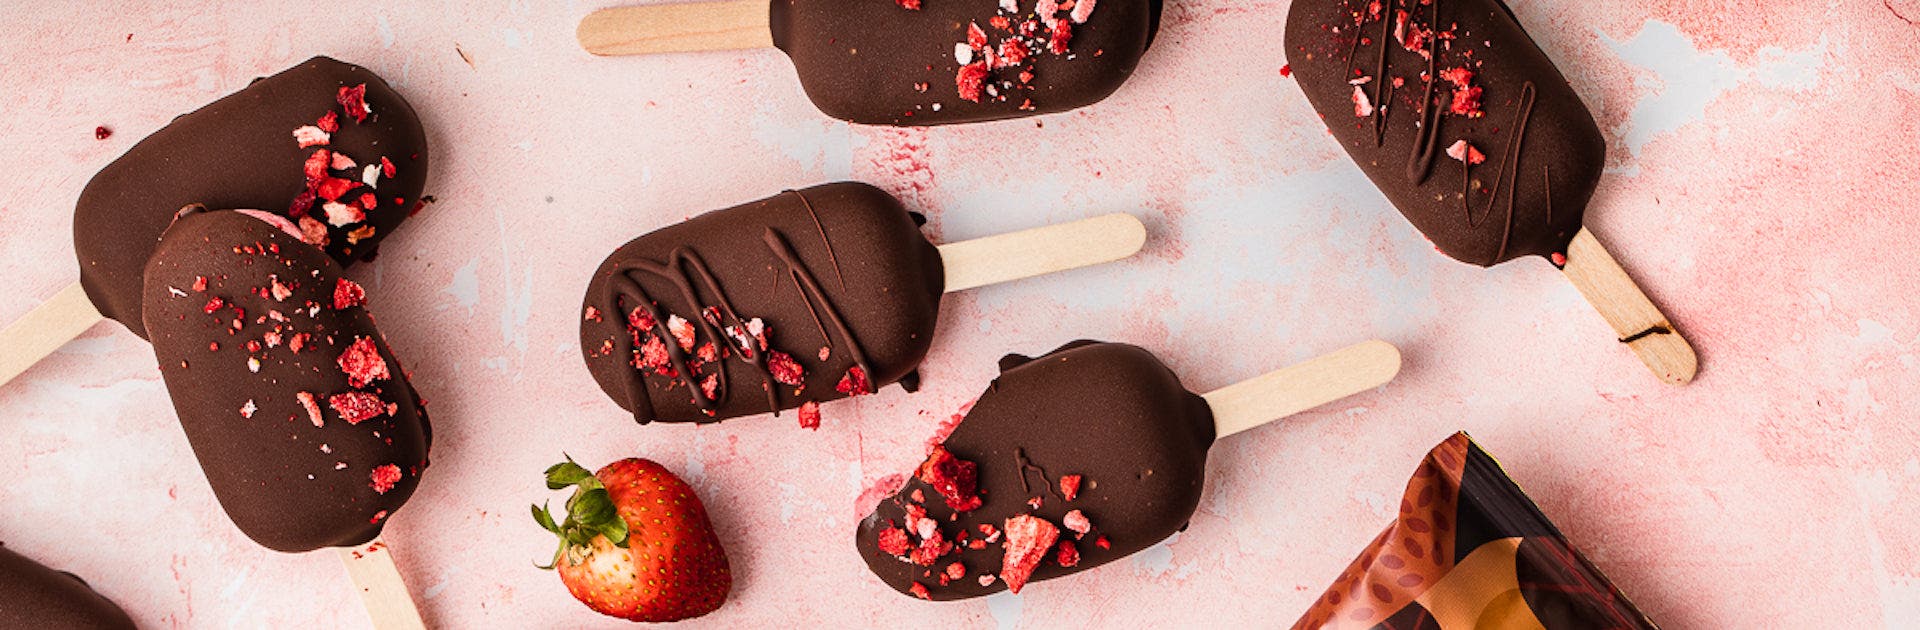 Chocolate-Covered Strawberry Popsicles